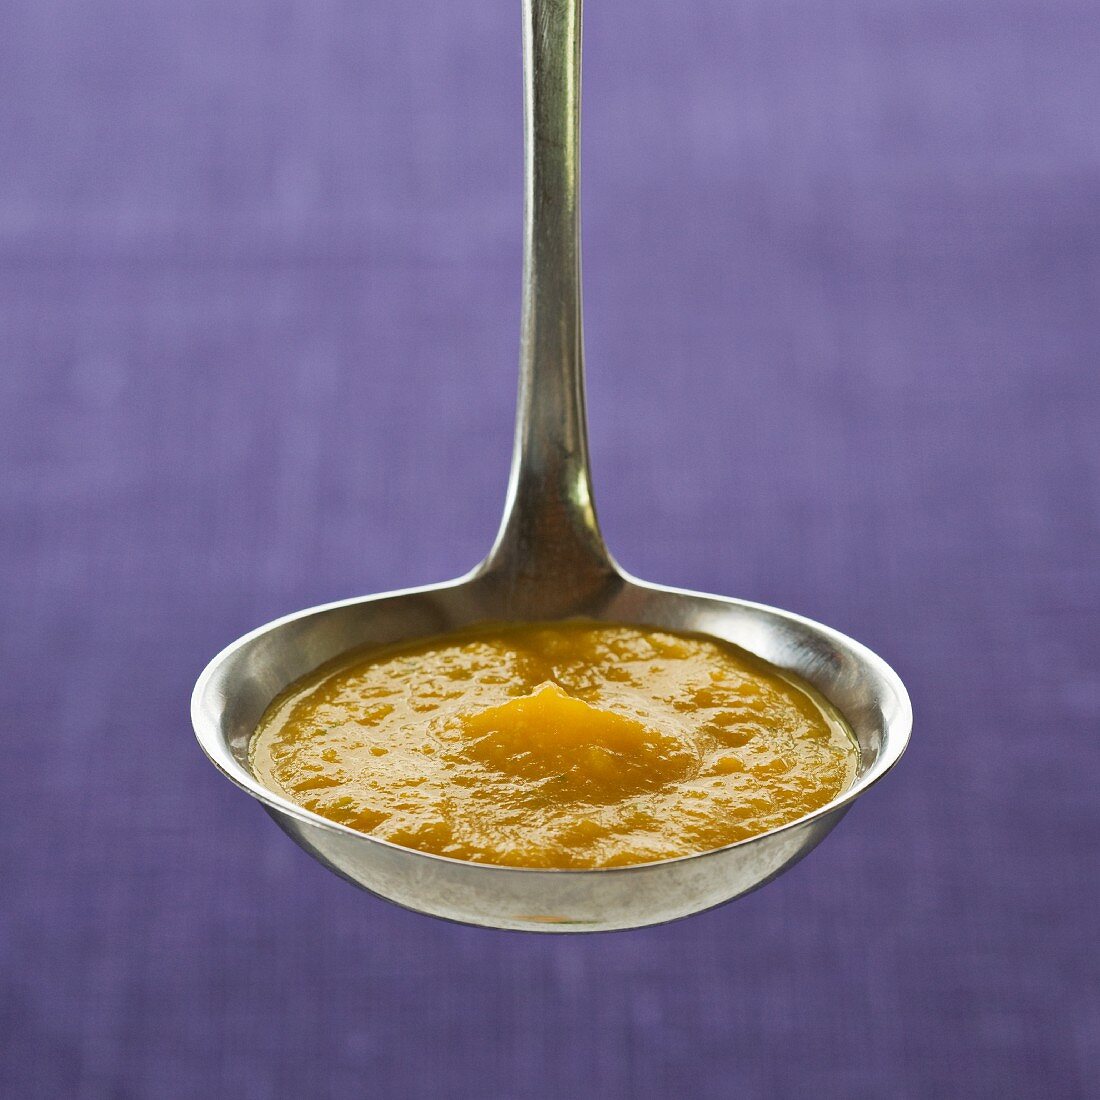 Ladle of carrot and orange sauce